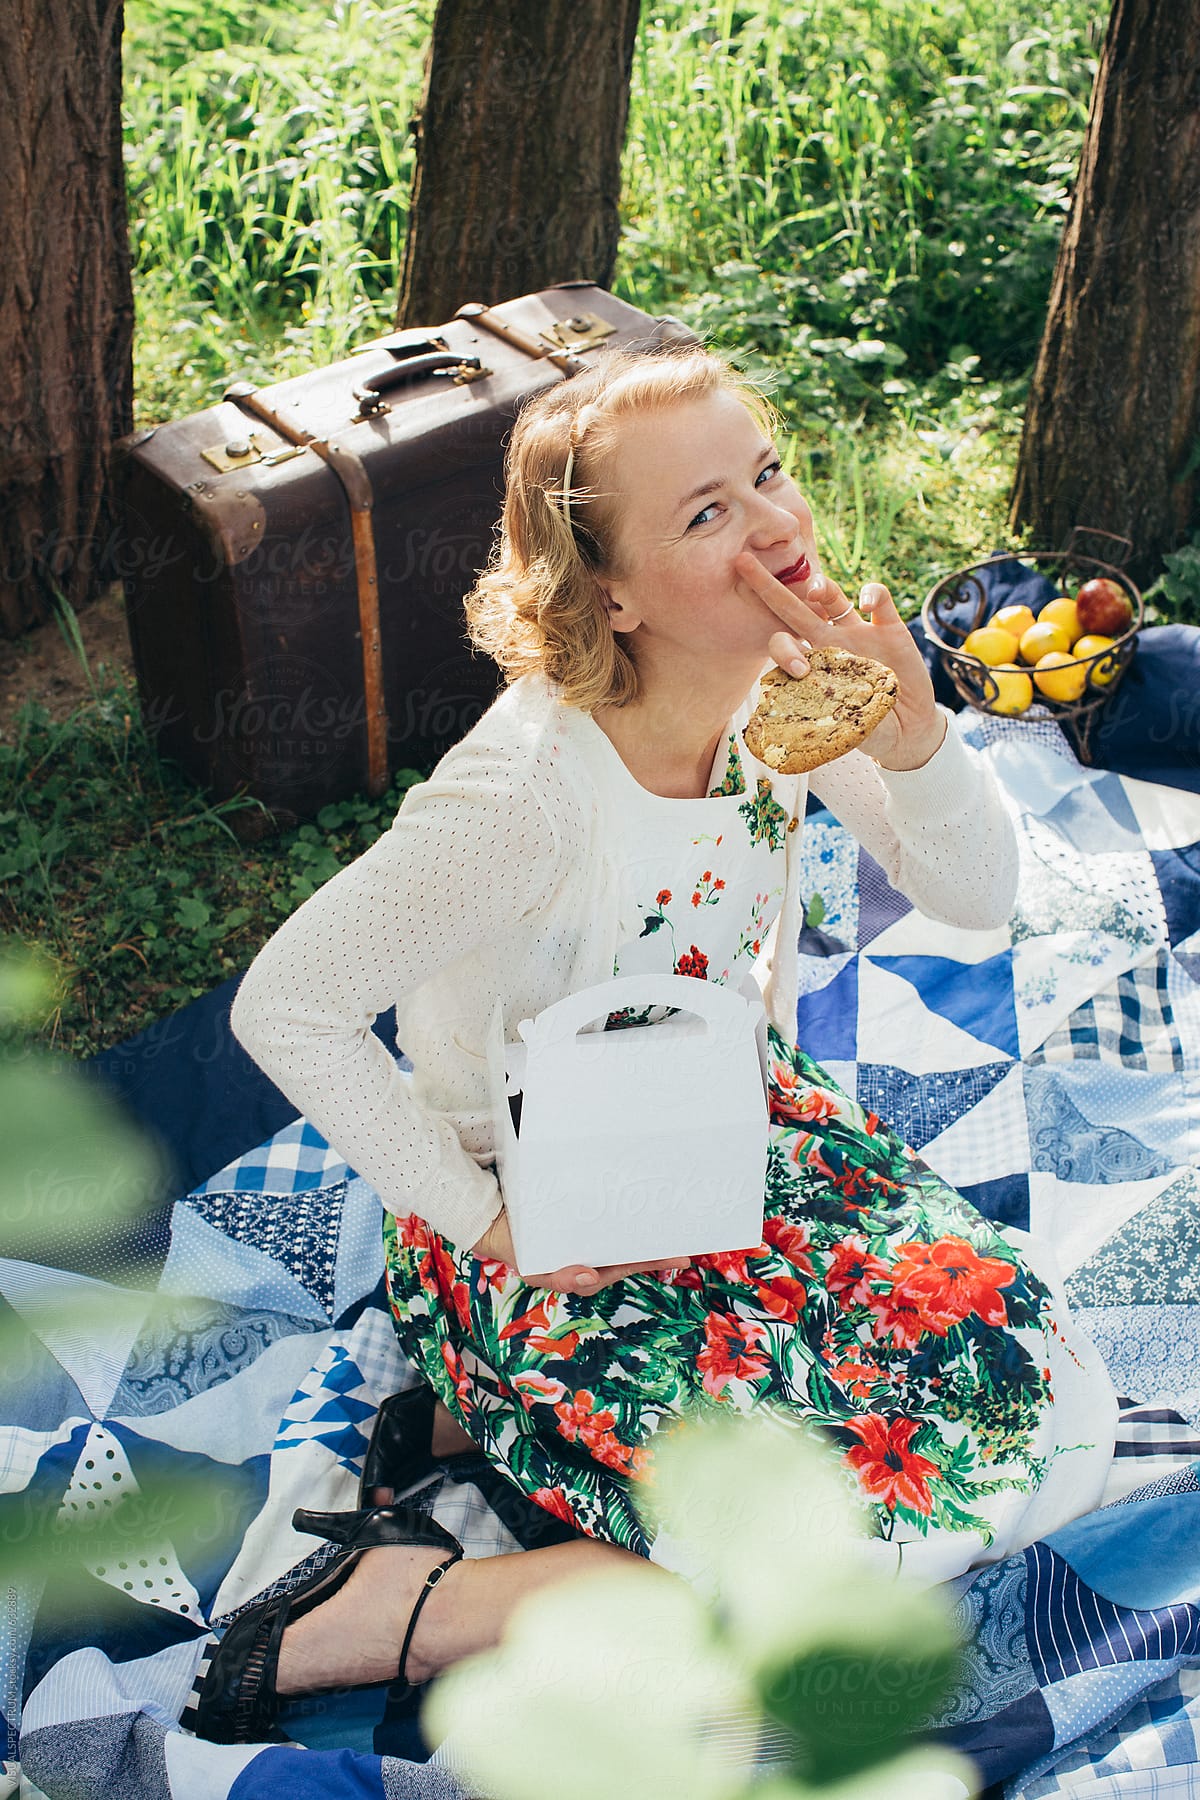 Summer Picnic - Pretty Blond Woman Enjoying Eating A Big Cookie in Sunny Meadow